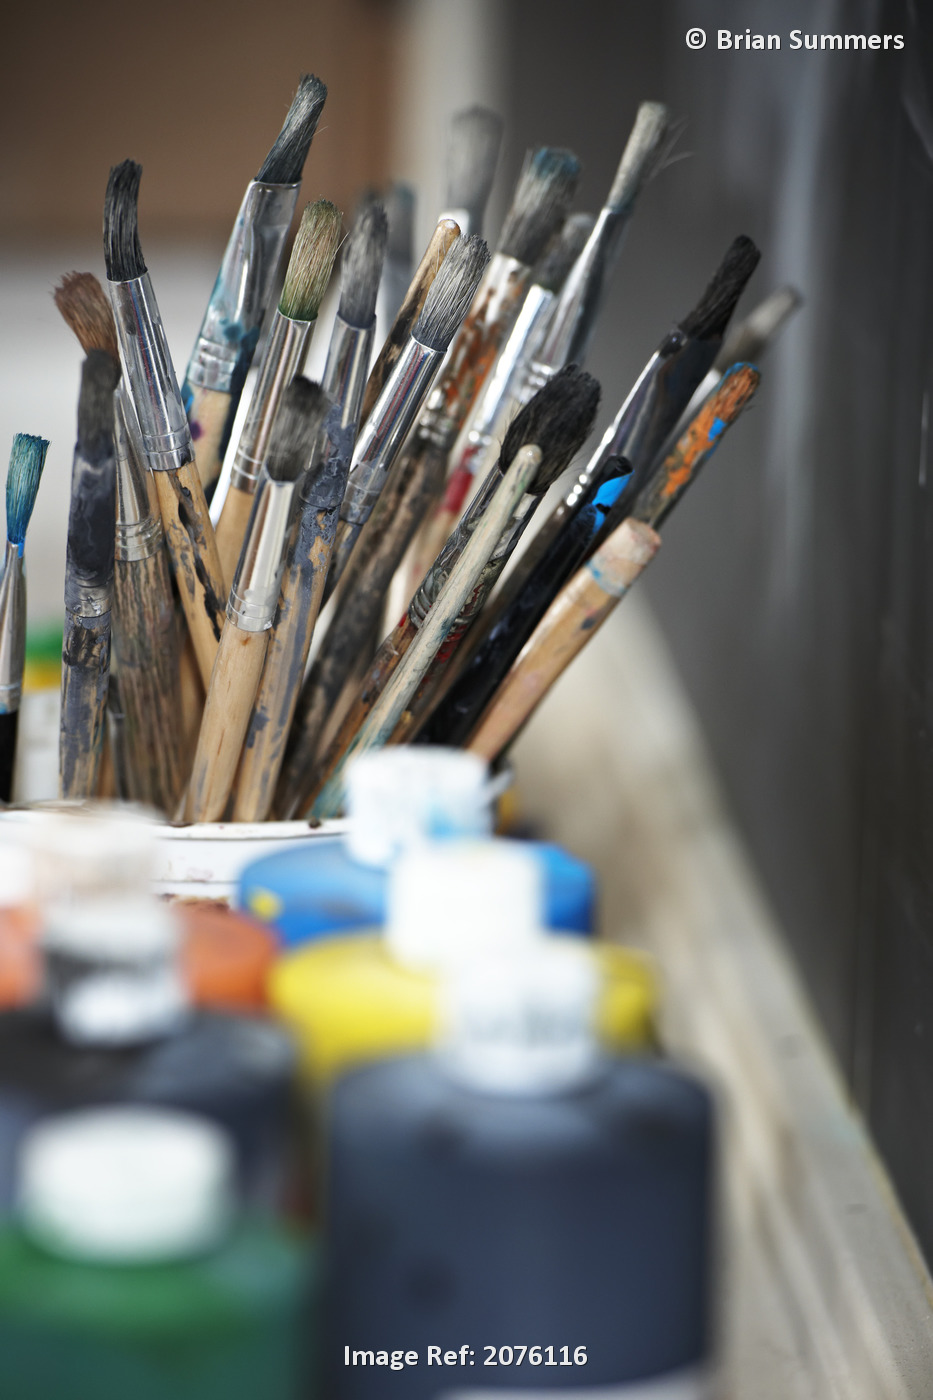 Paint Brushes And Paint Containers In A Classroom